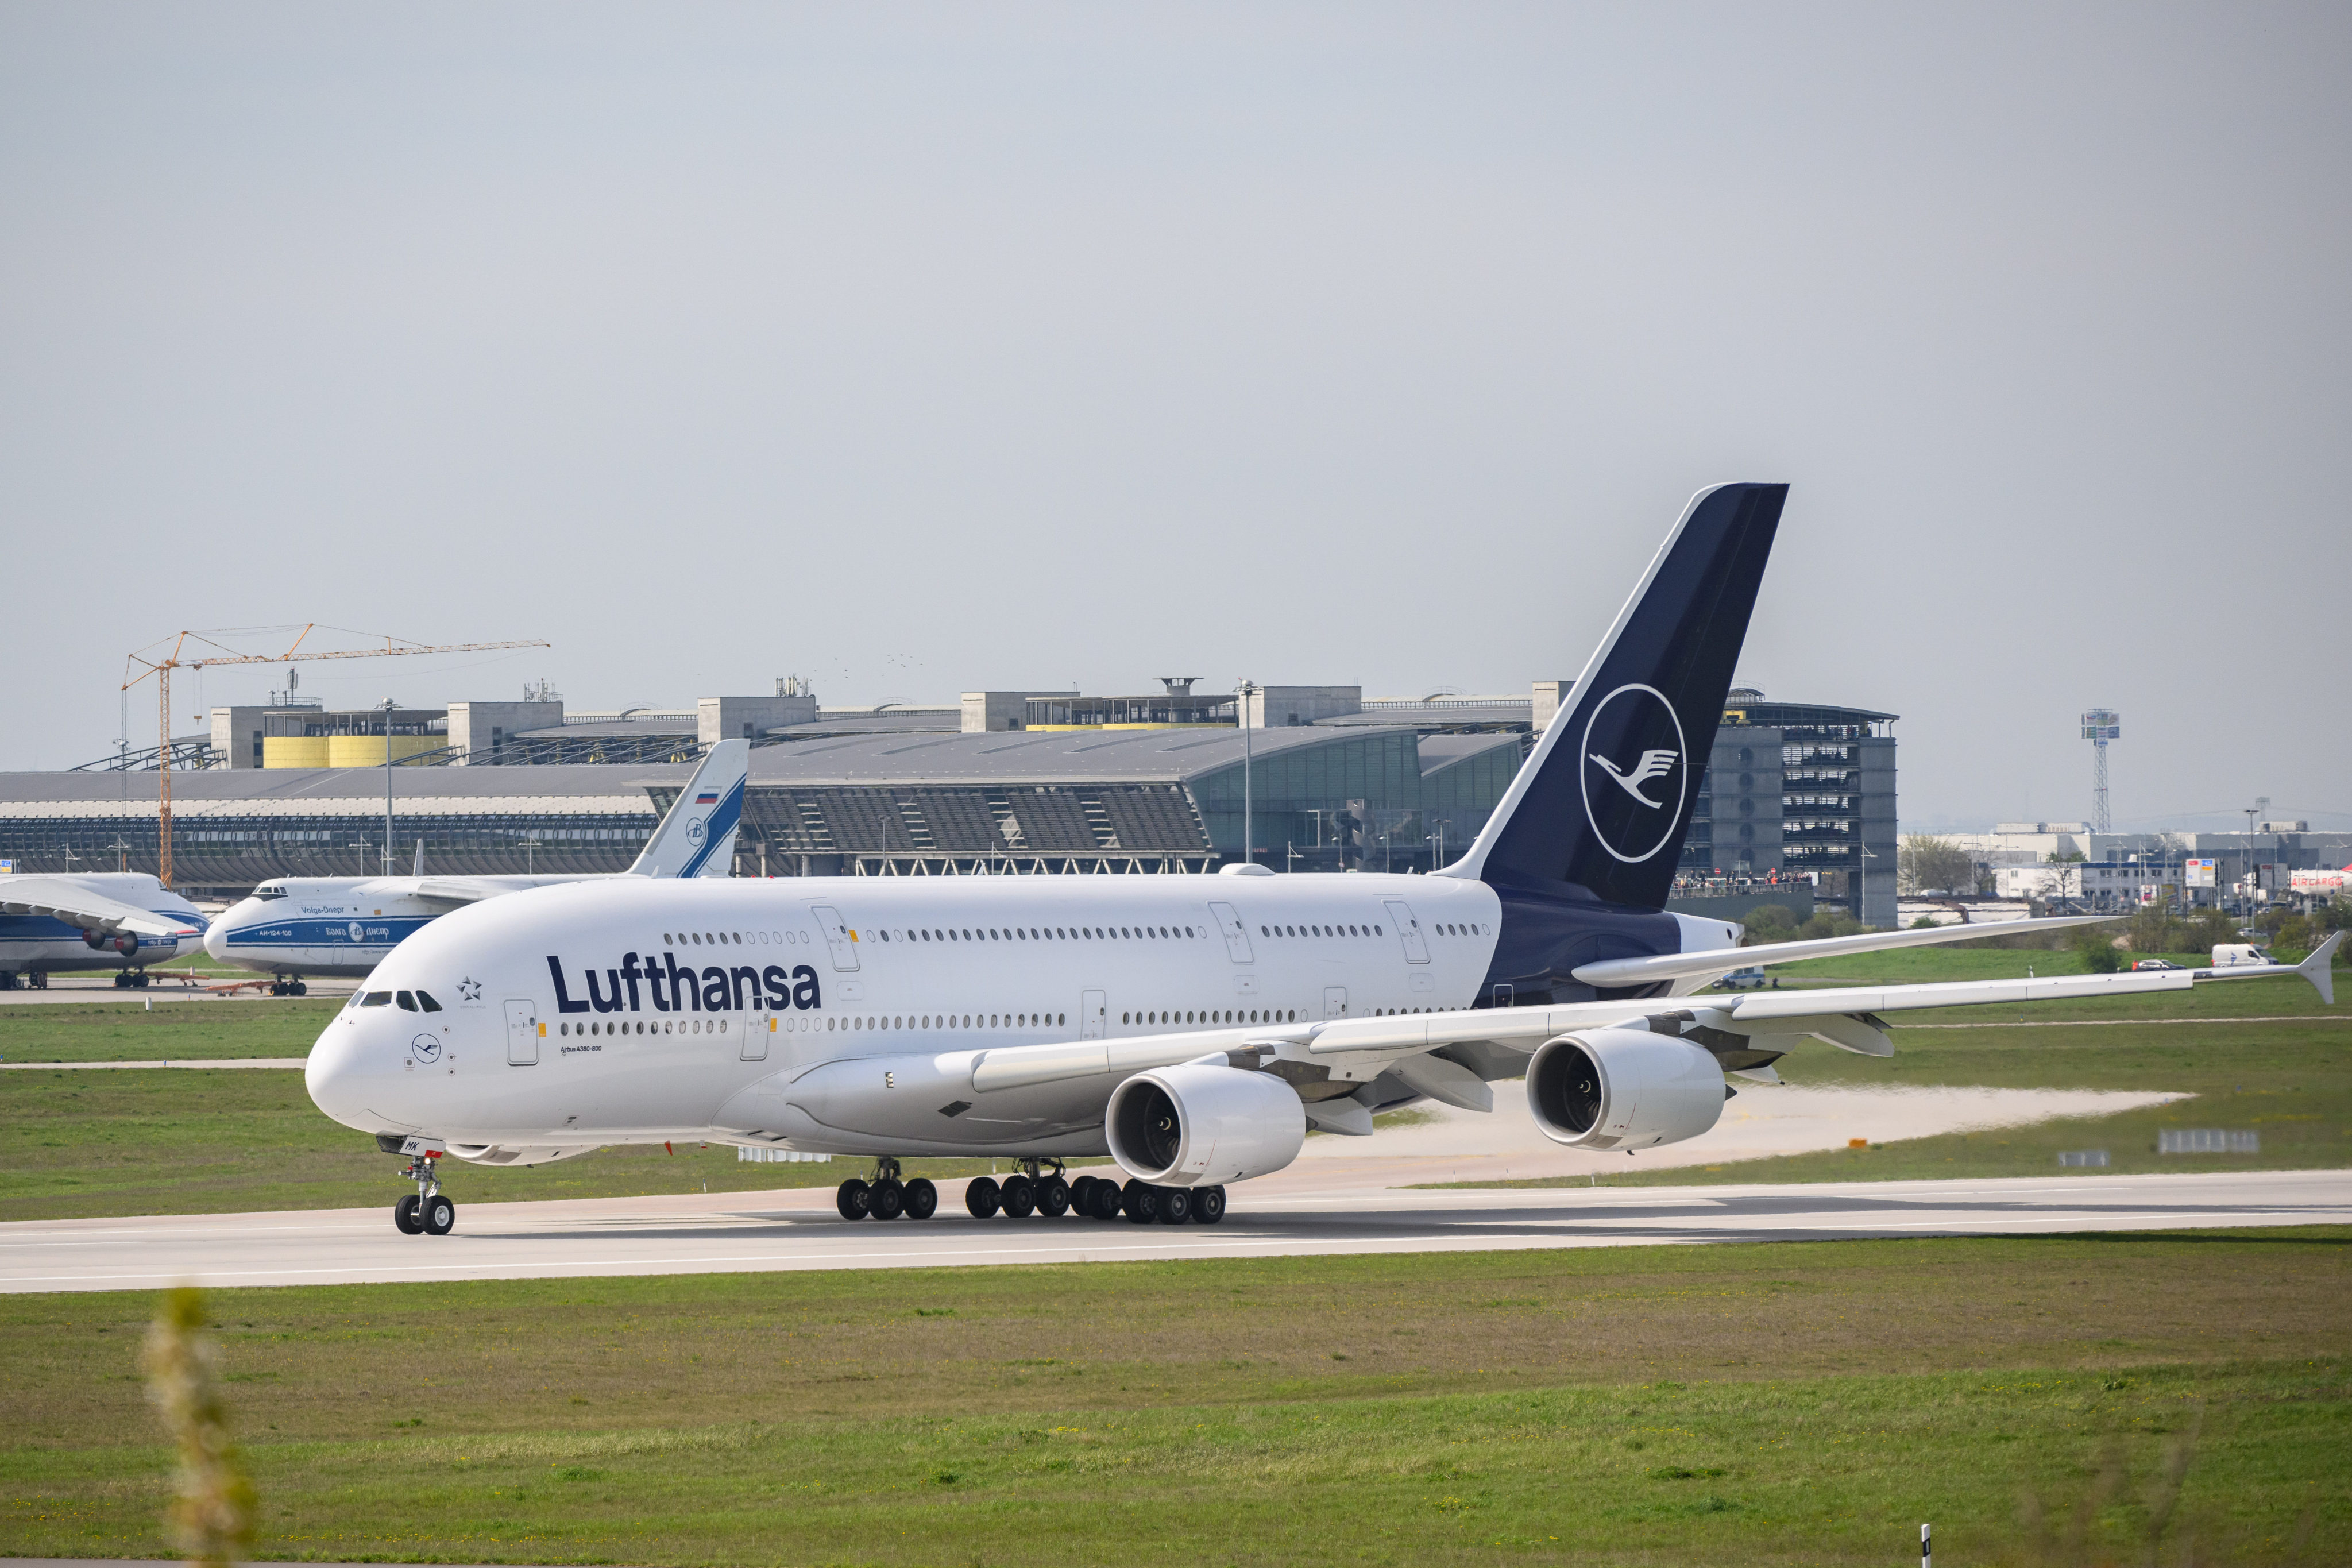 The Lufthansa flight was travelling between Munich and Bangkok when the quarrel erupted. File photo: dpa